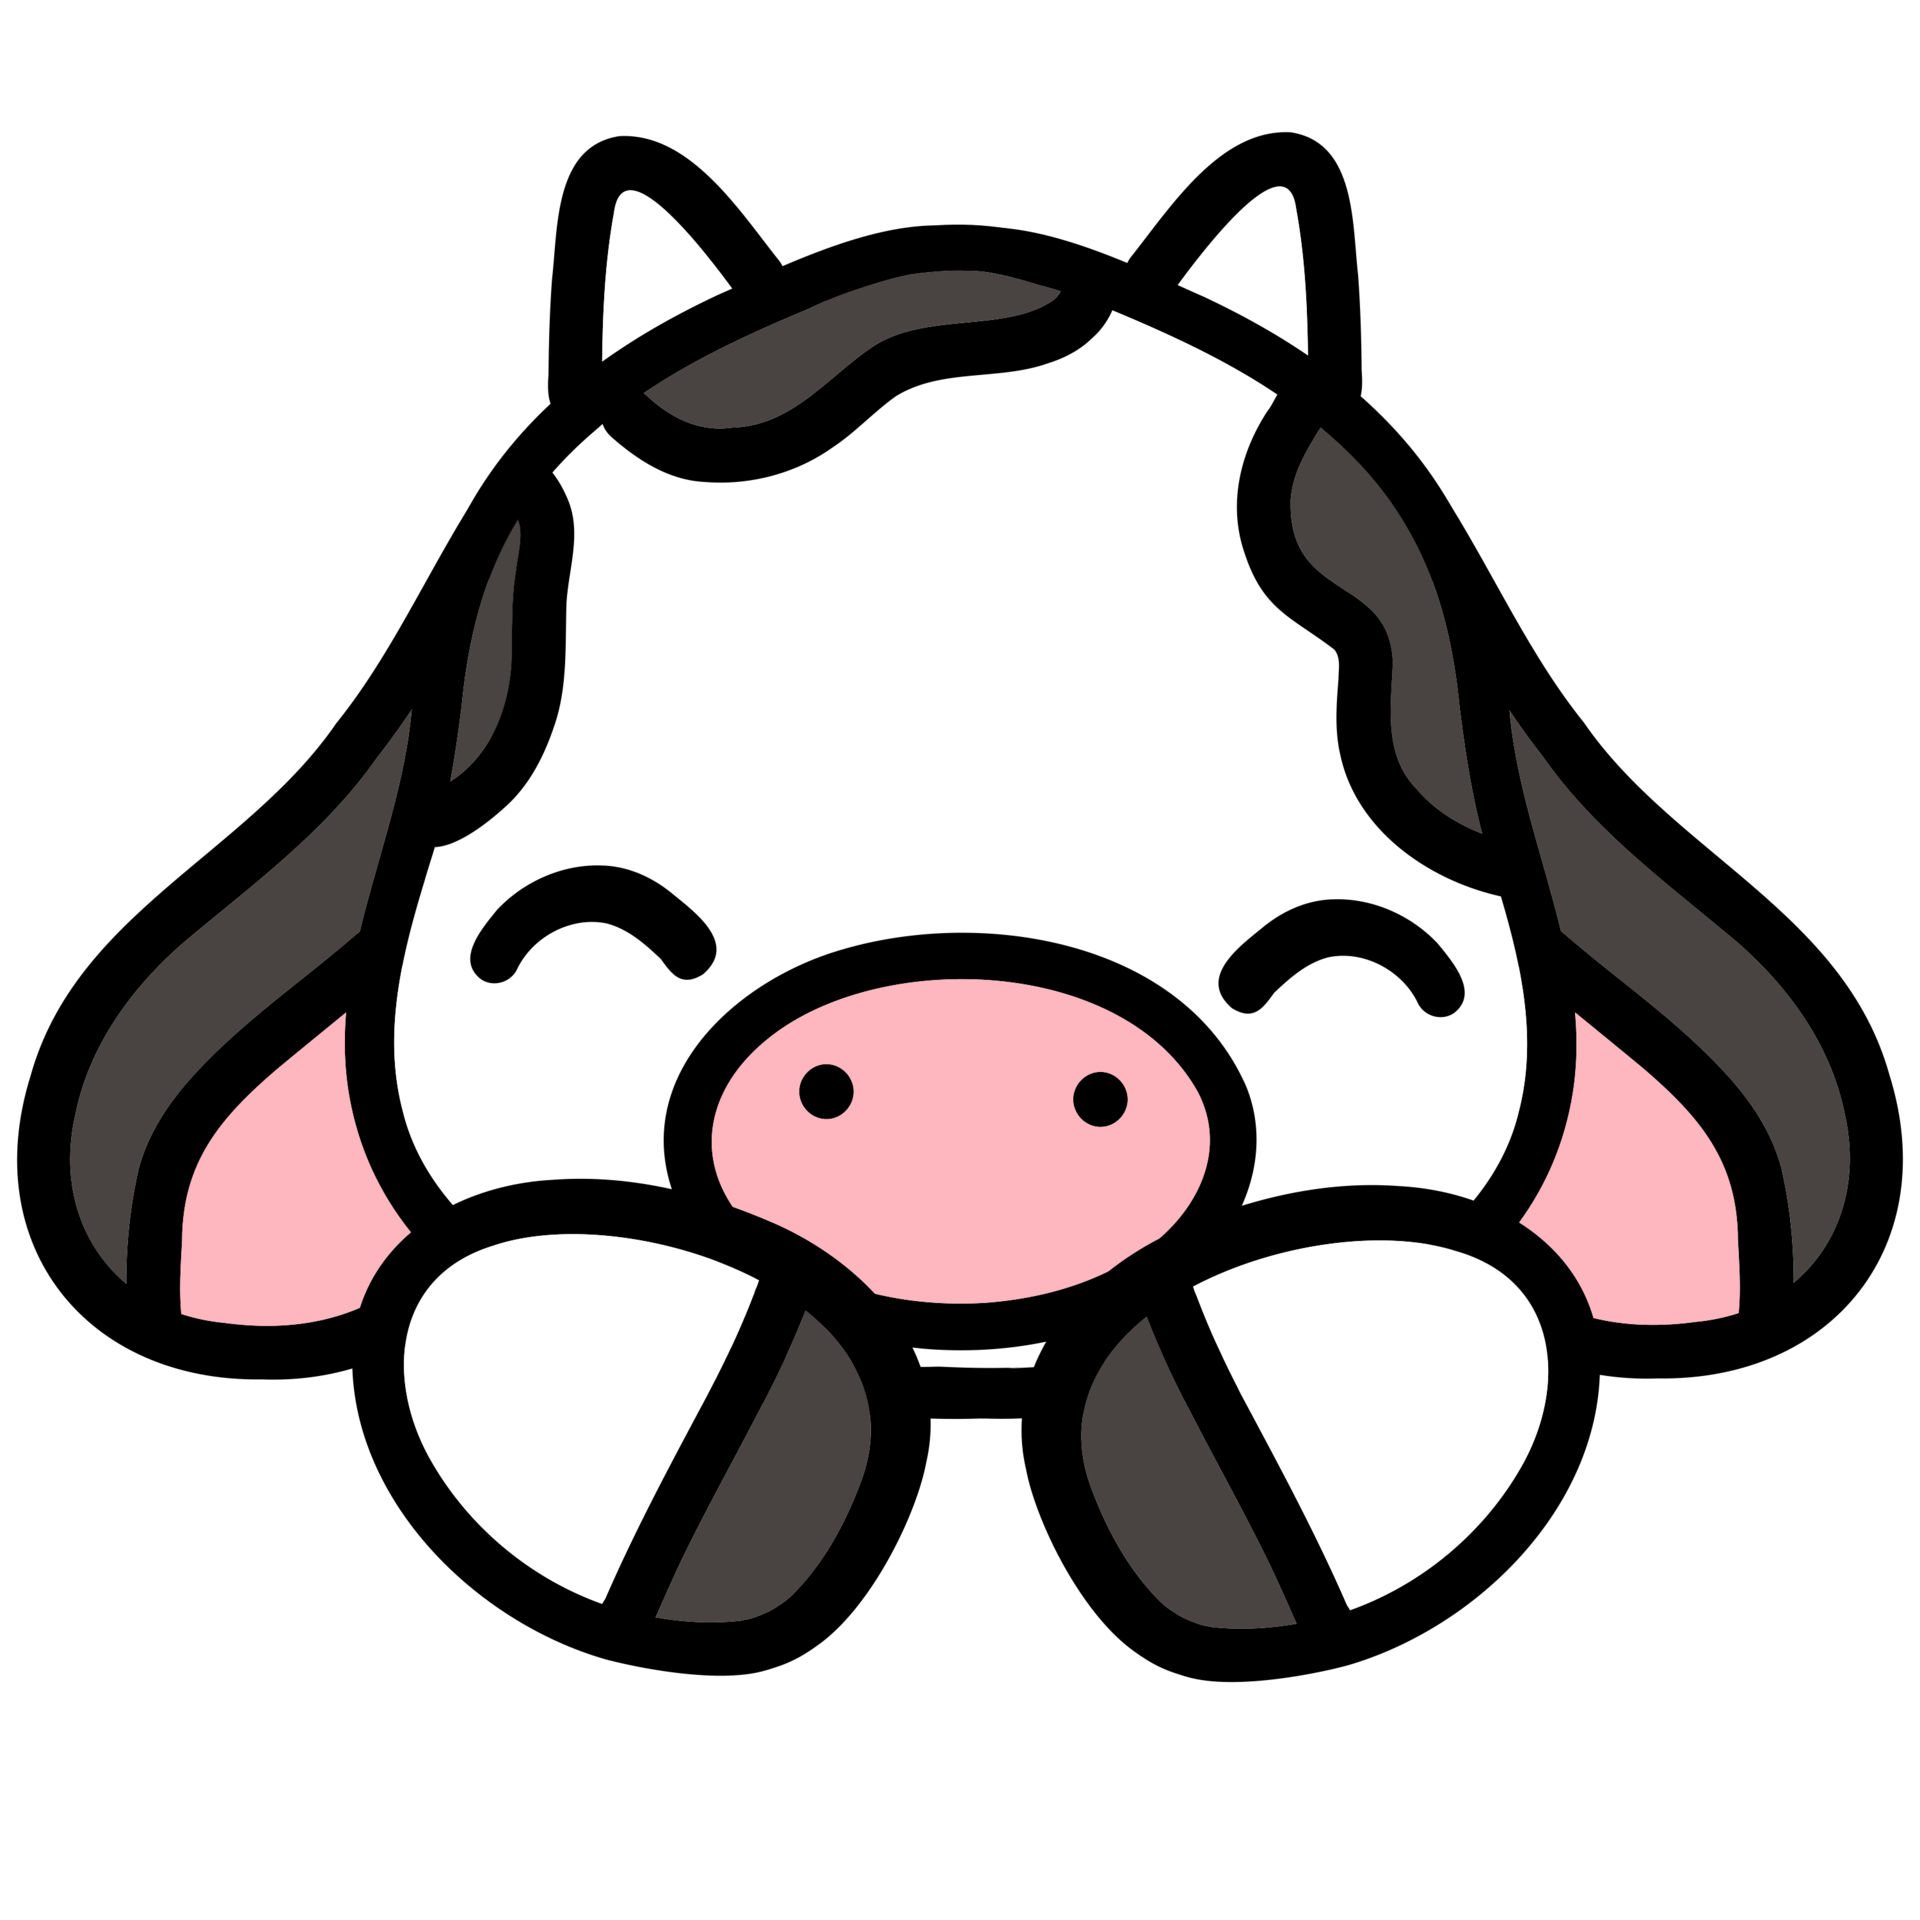 Cute cow, cow illustration, baby cow, animal illustration 21276934 PNG